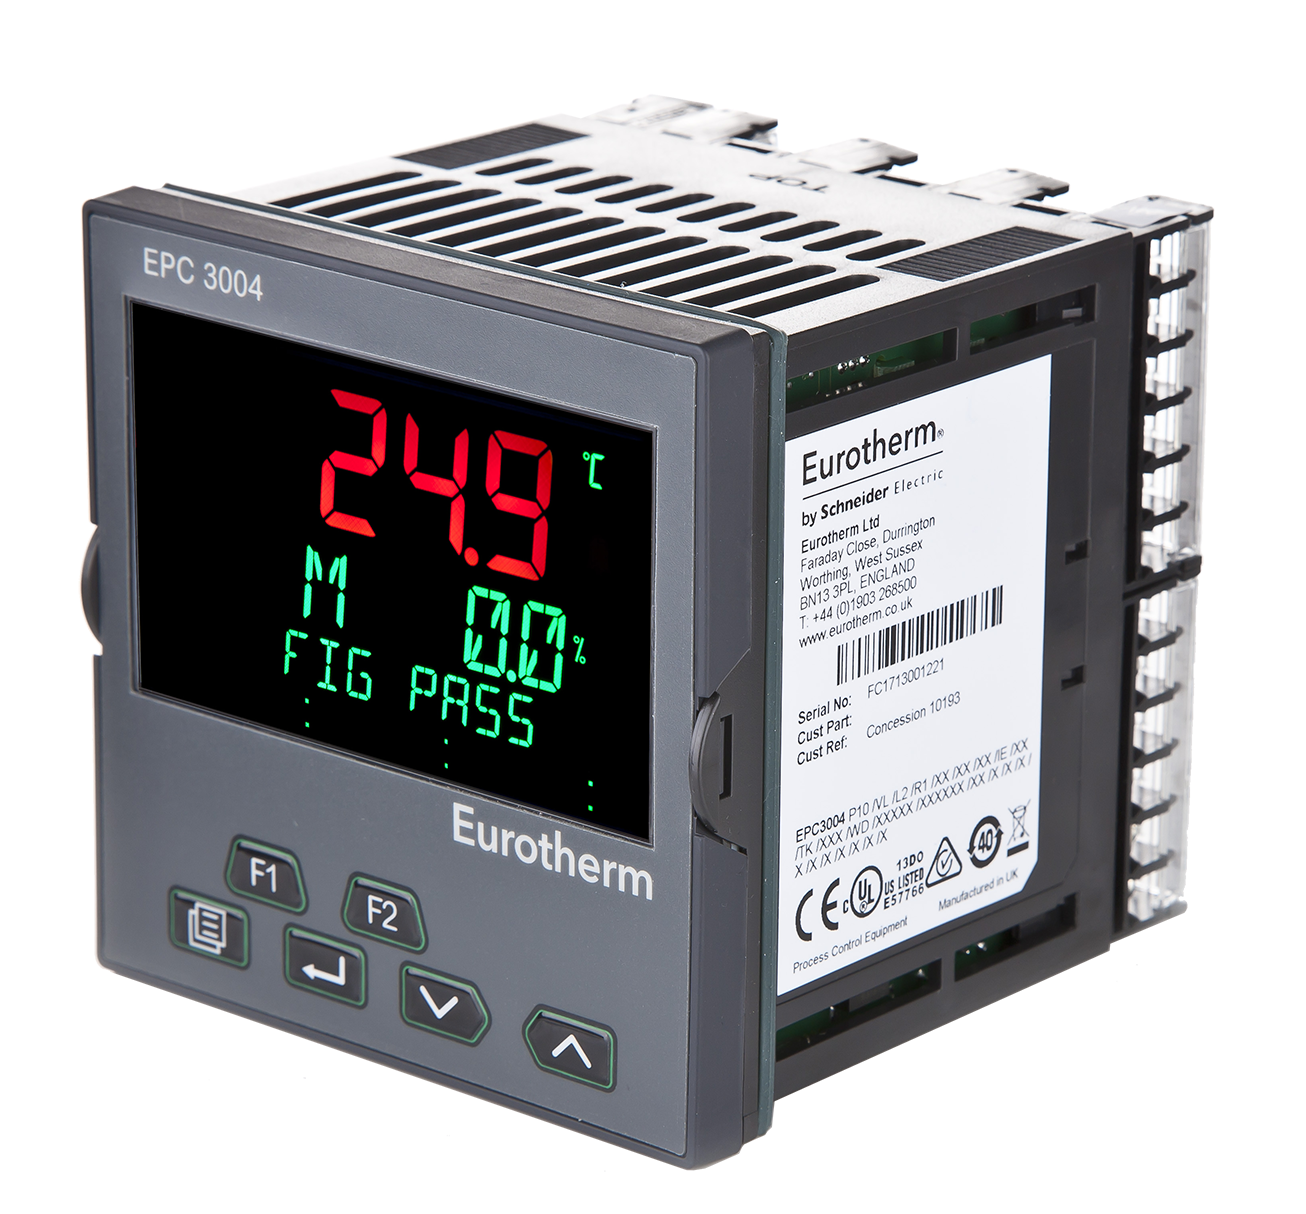 EPC3000 Programmable Controllers Eurotherm Product